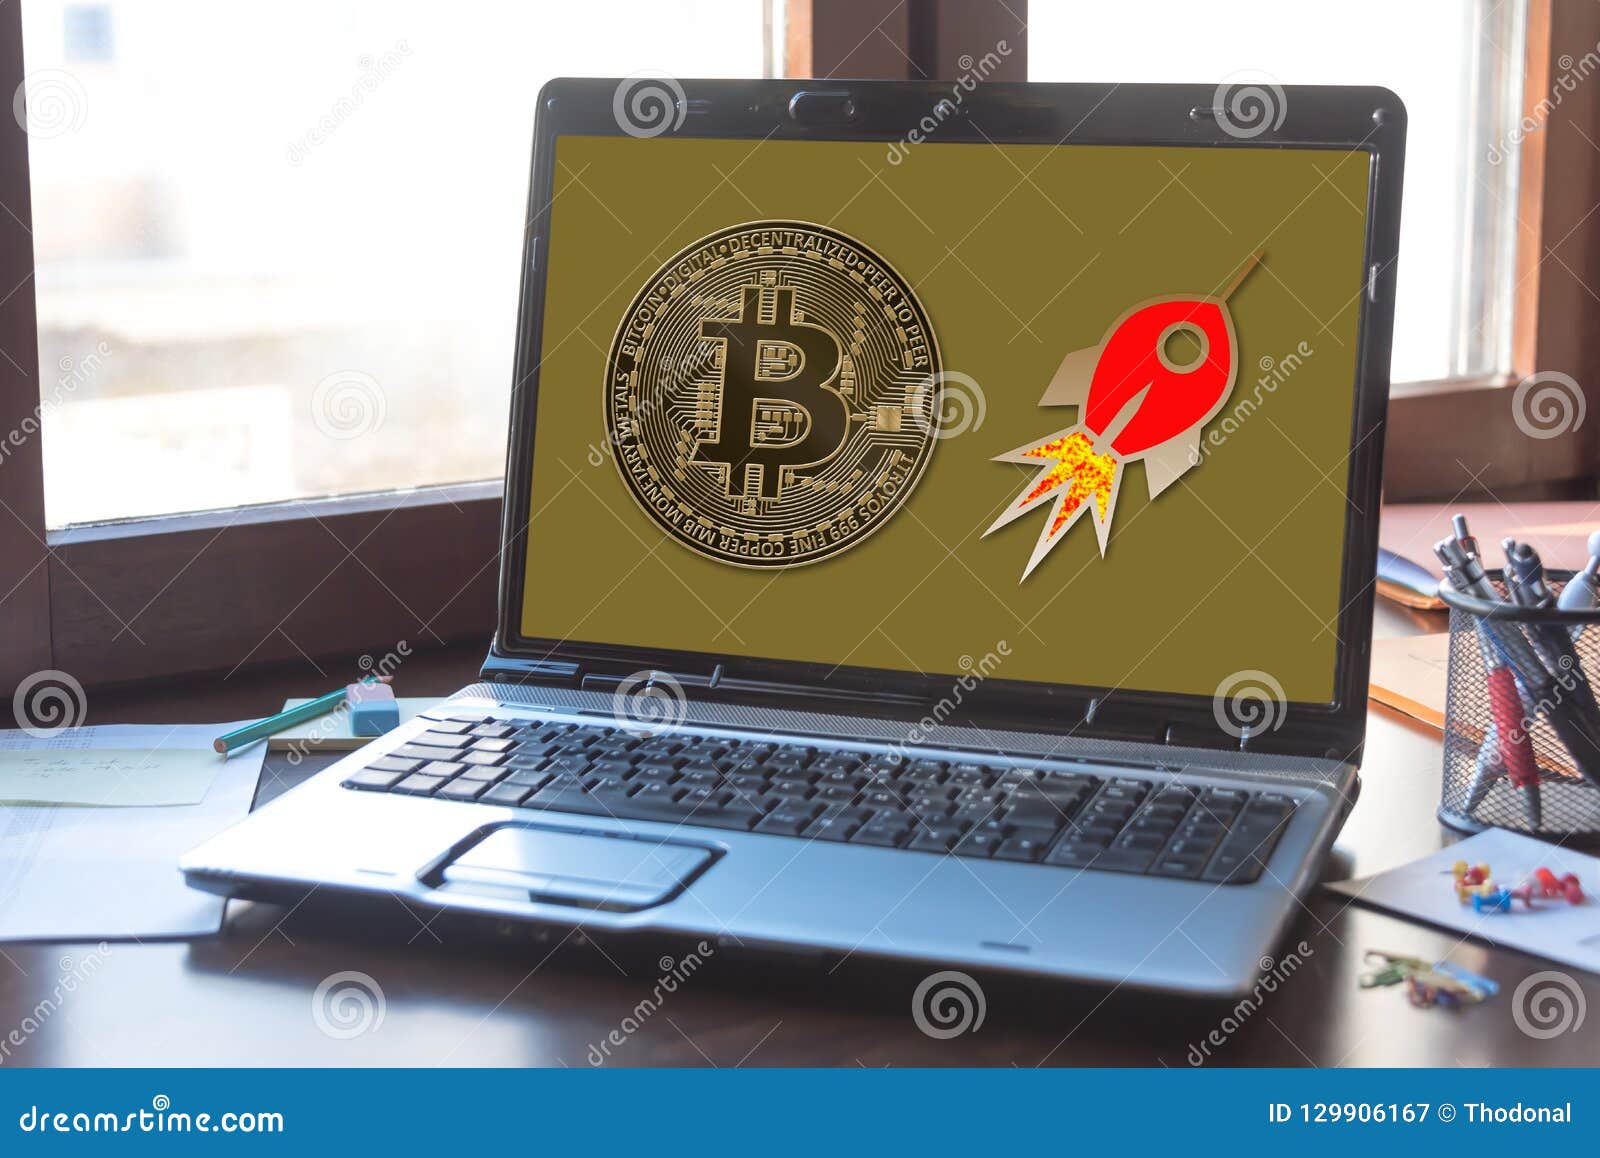 How to buy laptop with bitcoin historial de trading binance